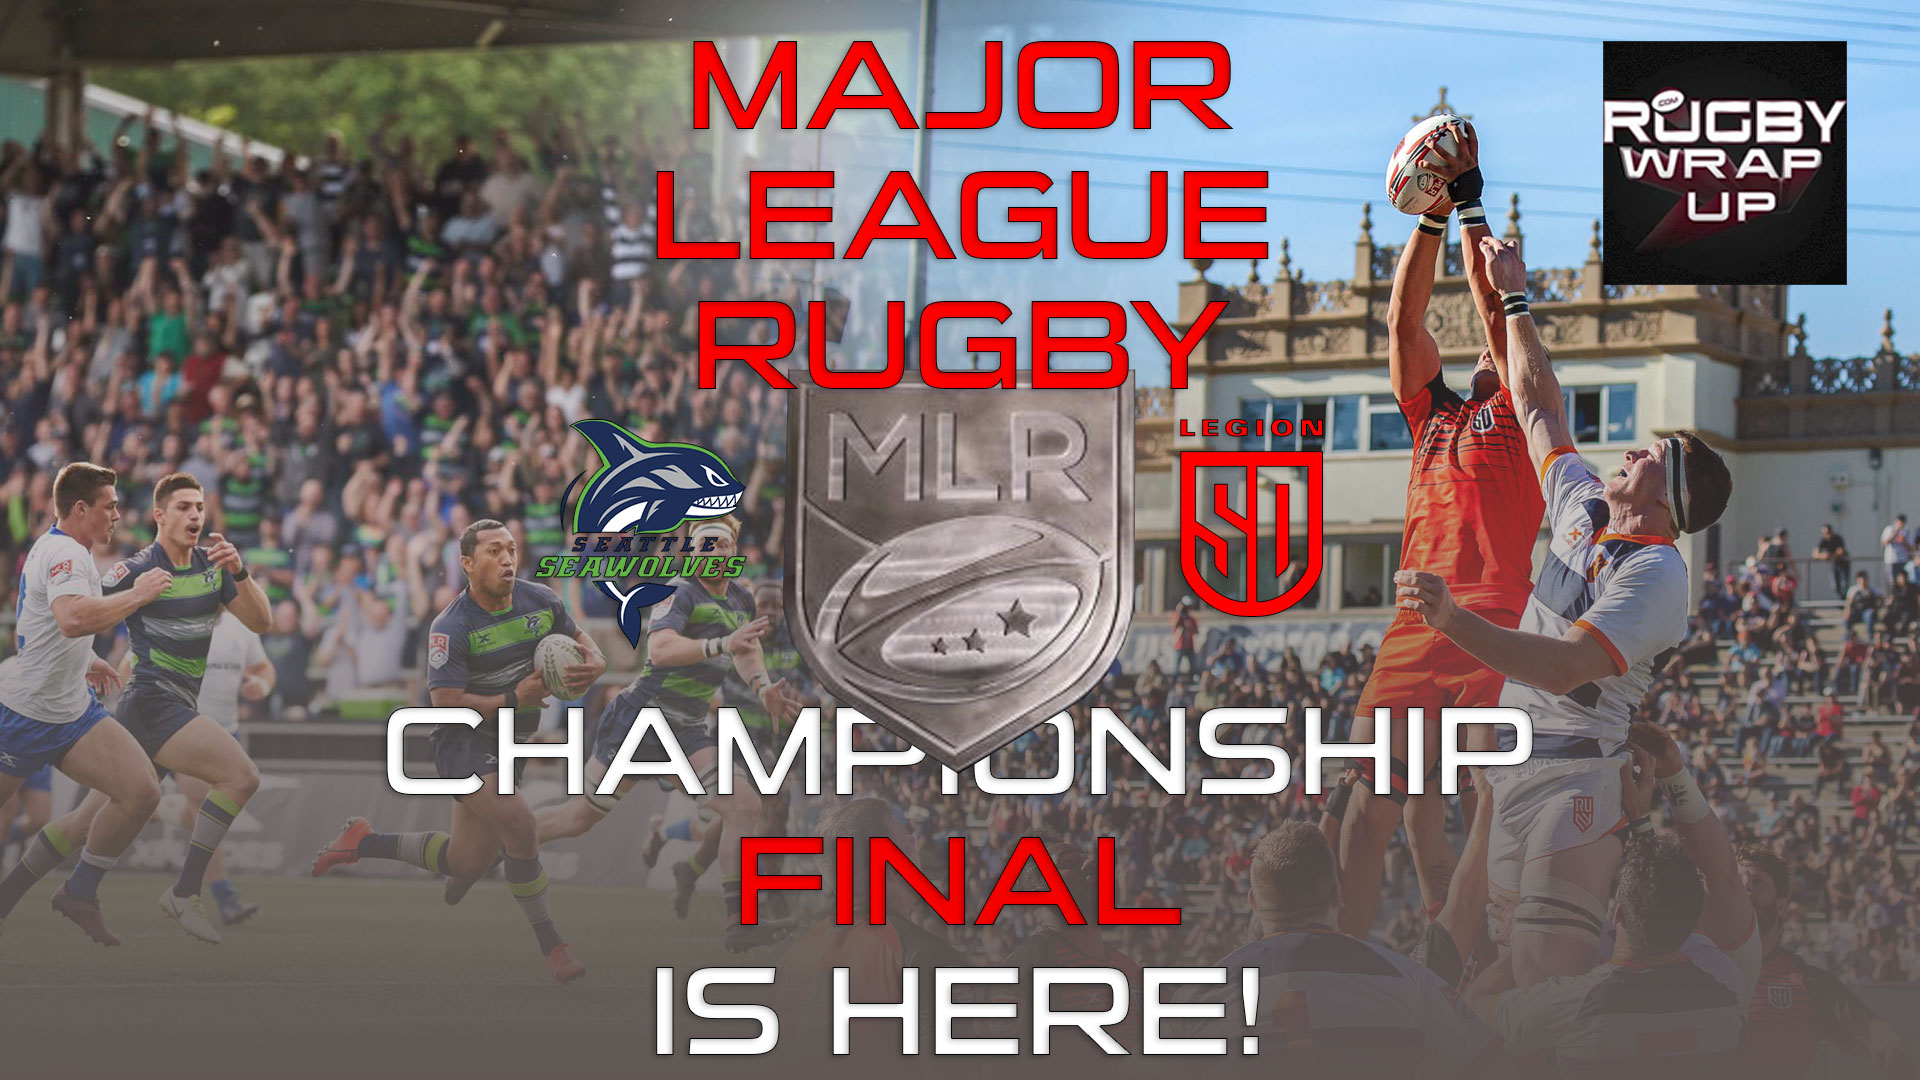 MAJOR-LEAGUE-RUGBY---championship-final, Lou_Stanfill, Rugby_Wrap_Up